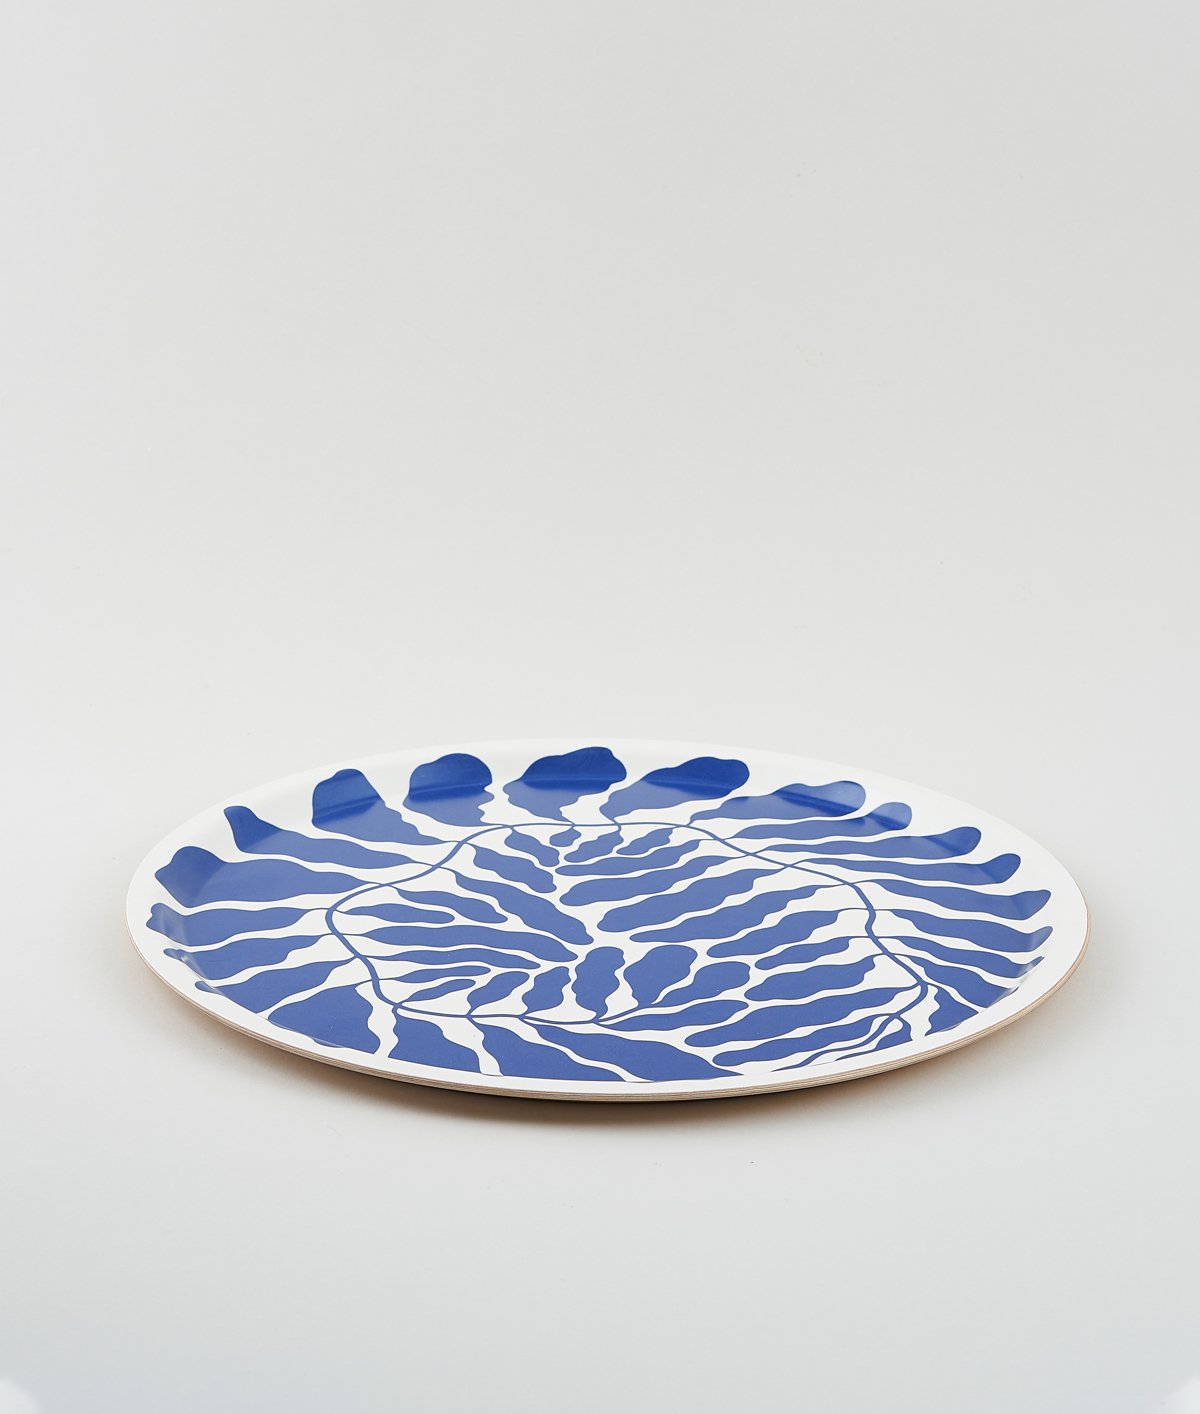 Blue Leaves Round Art Tray